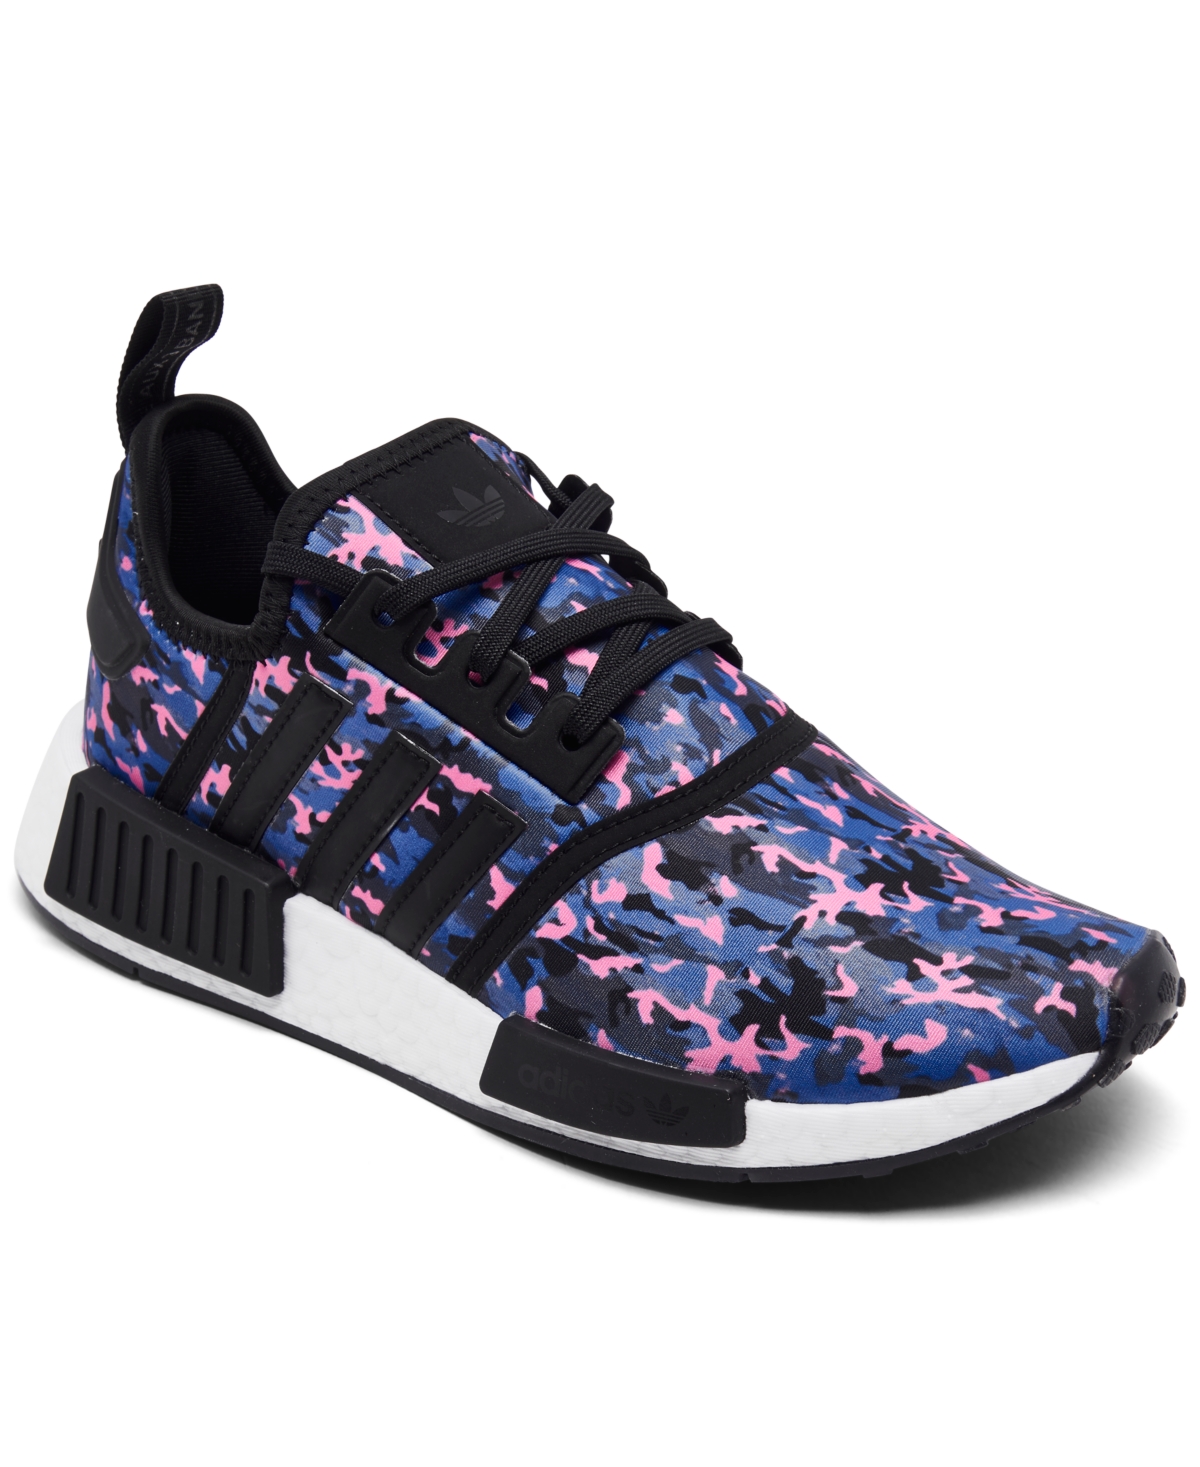 adidas Big Kids Originals Nmd R1 Casual Sneakers from Finish Line